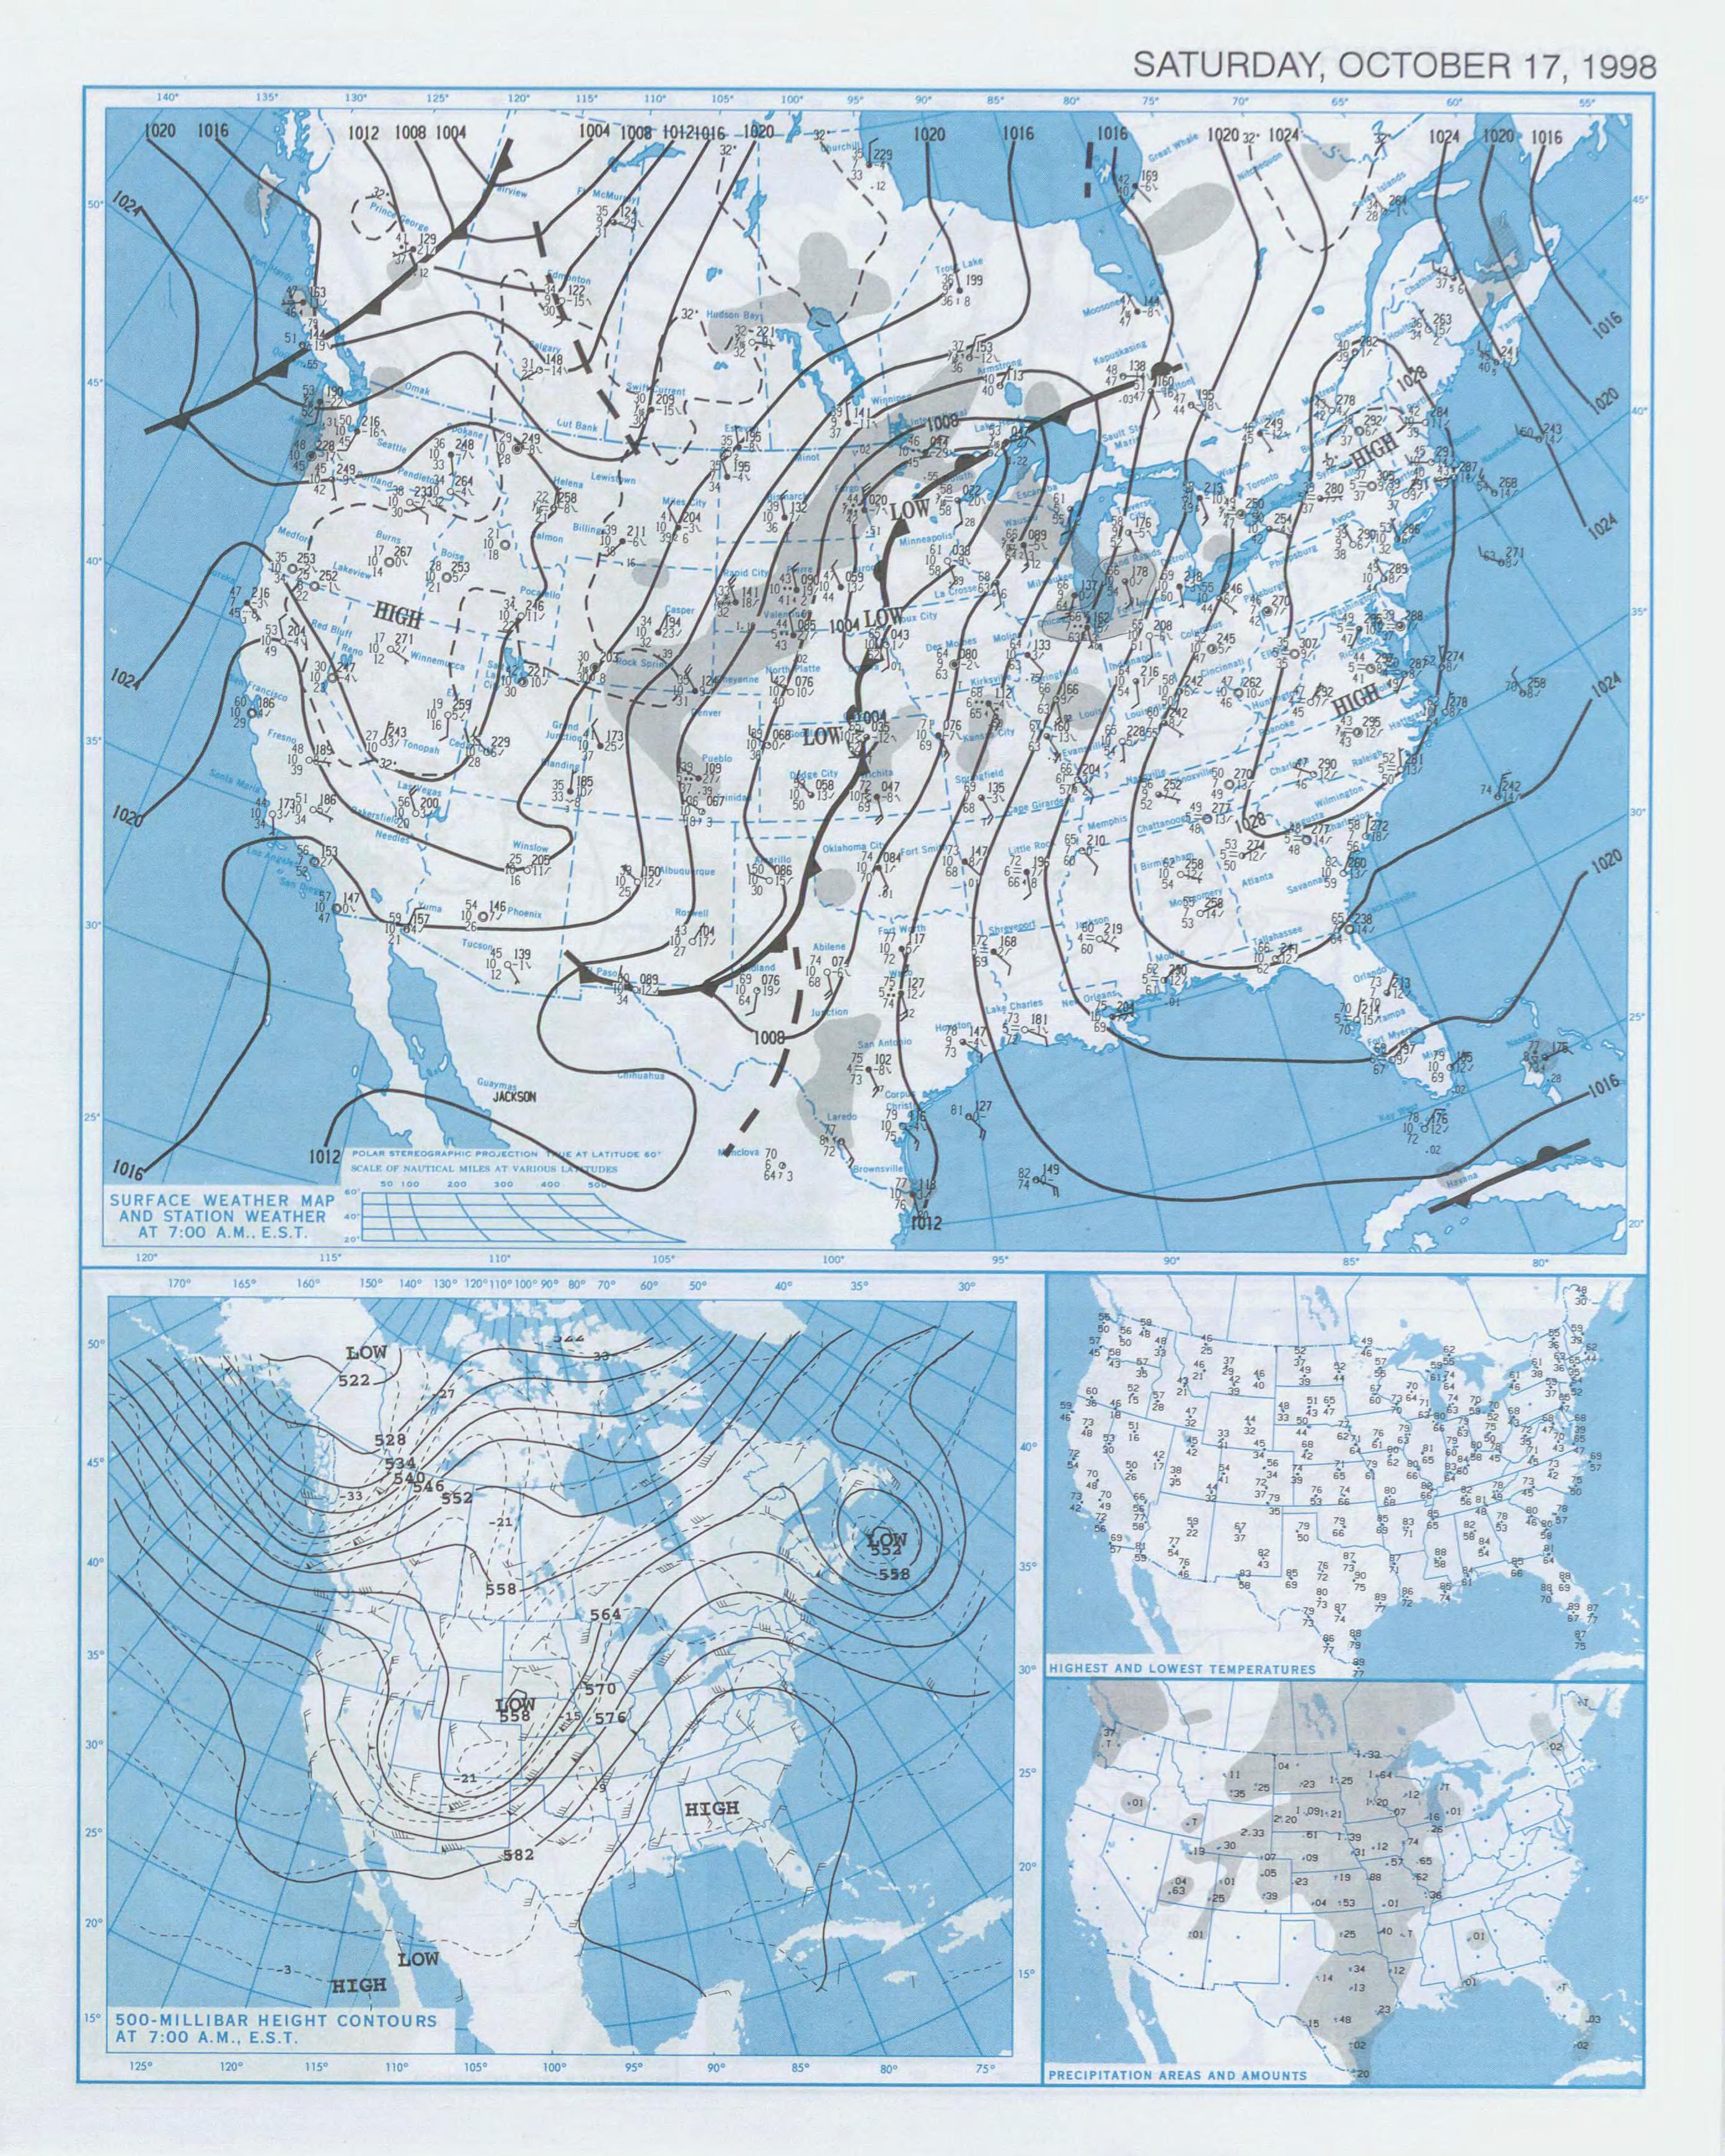 October 17, 1998 Weather Map